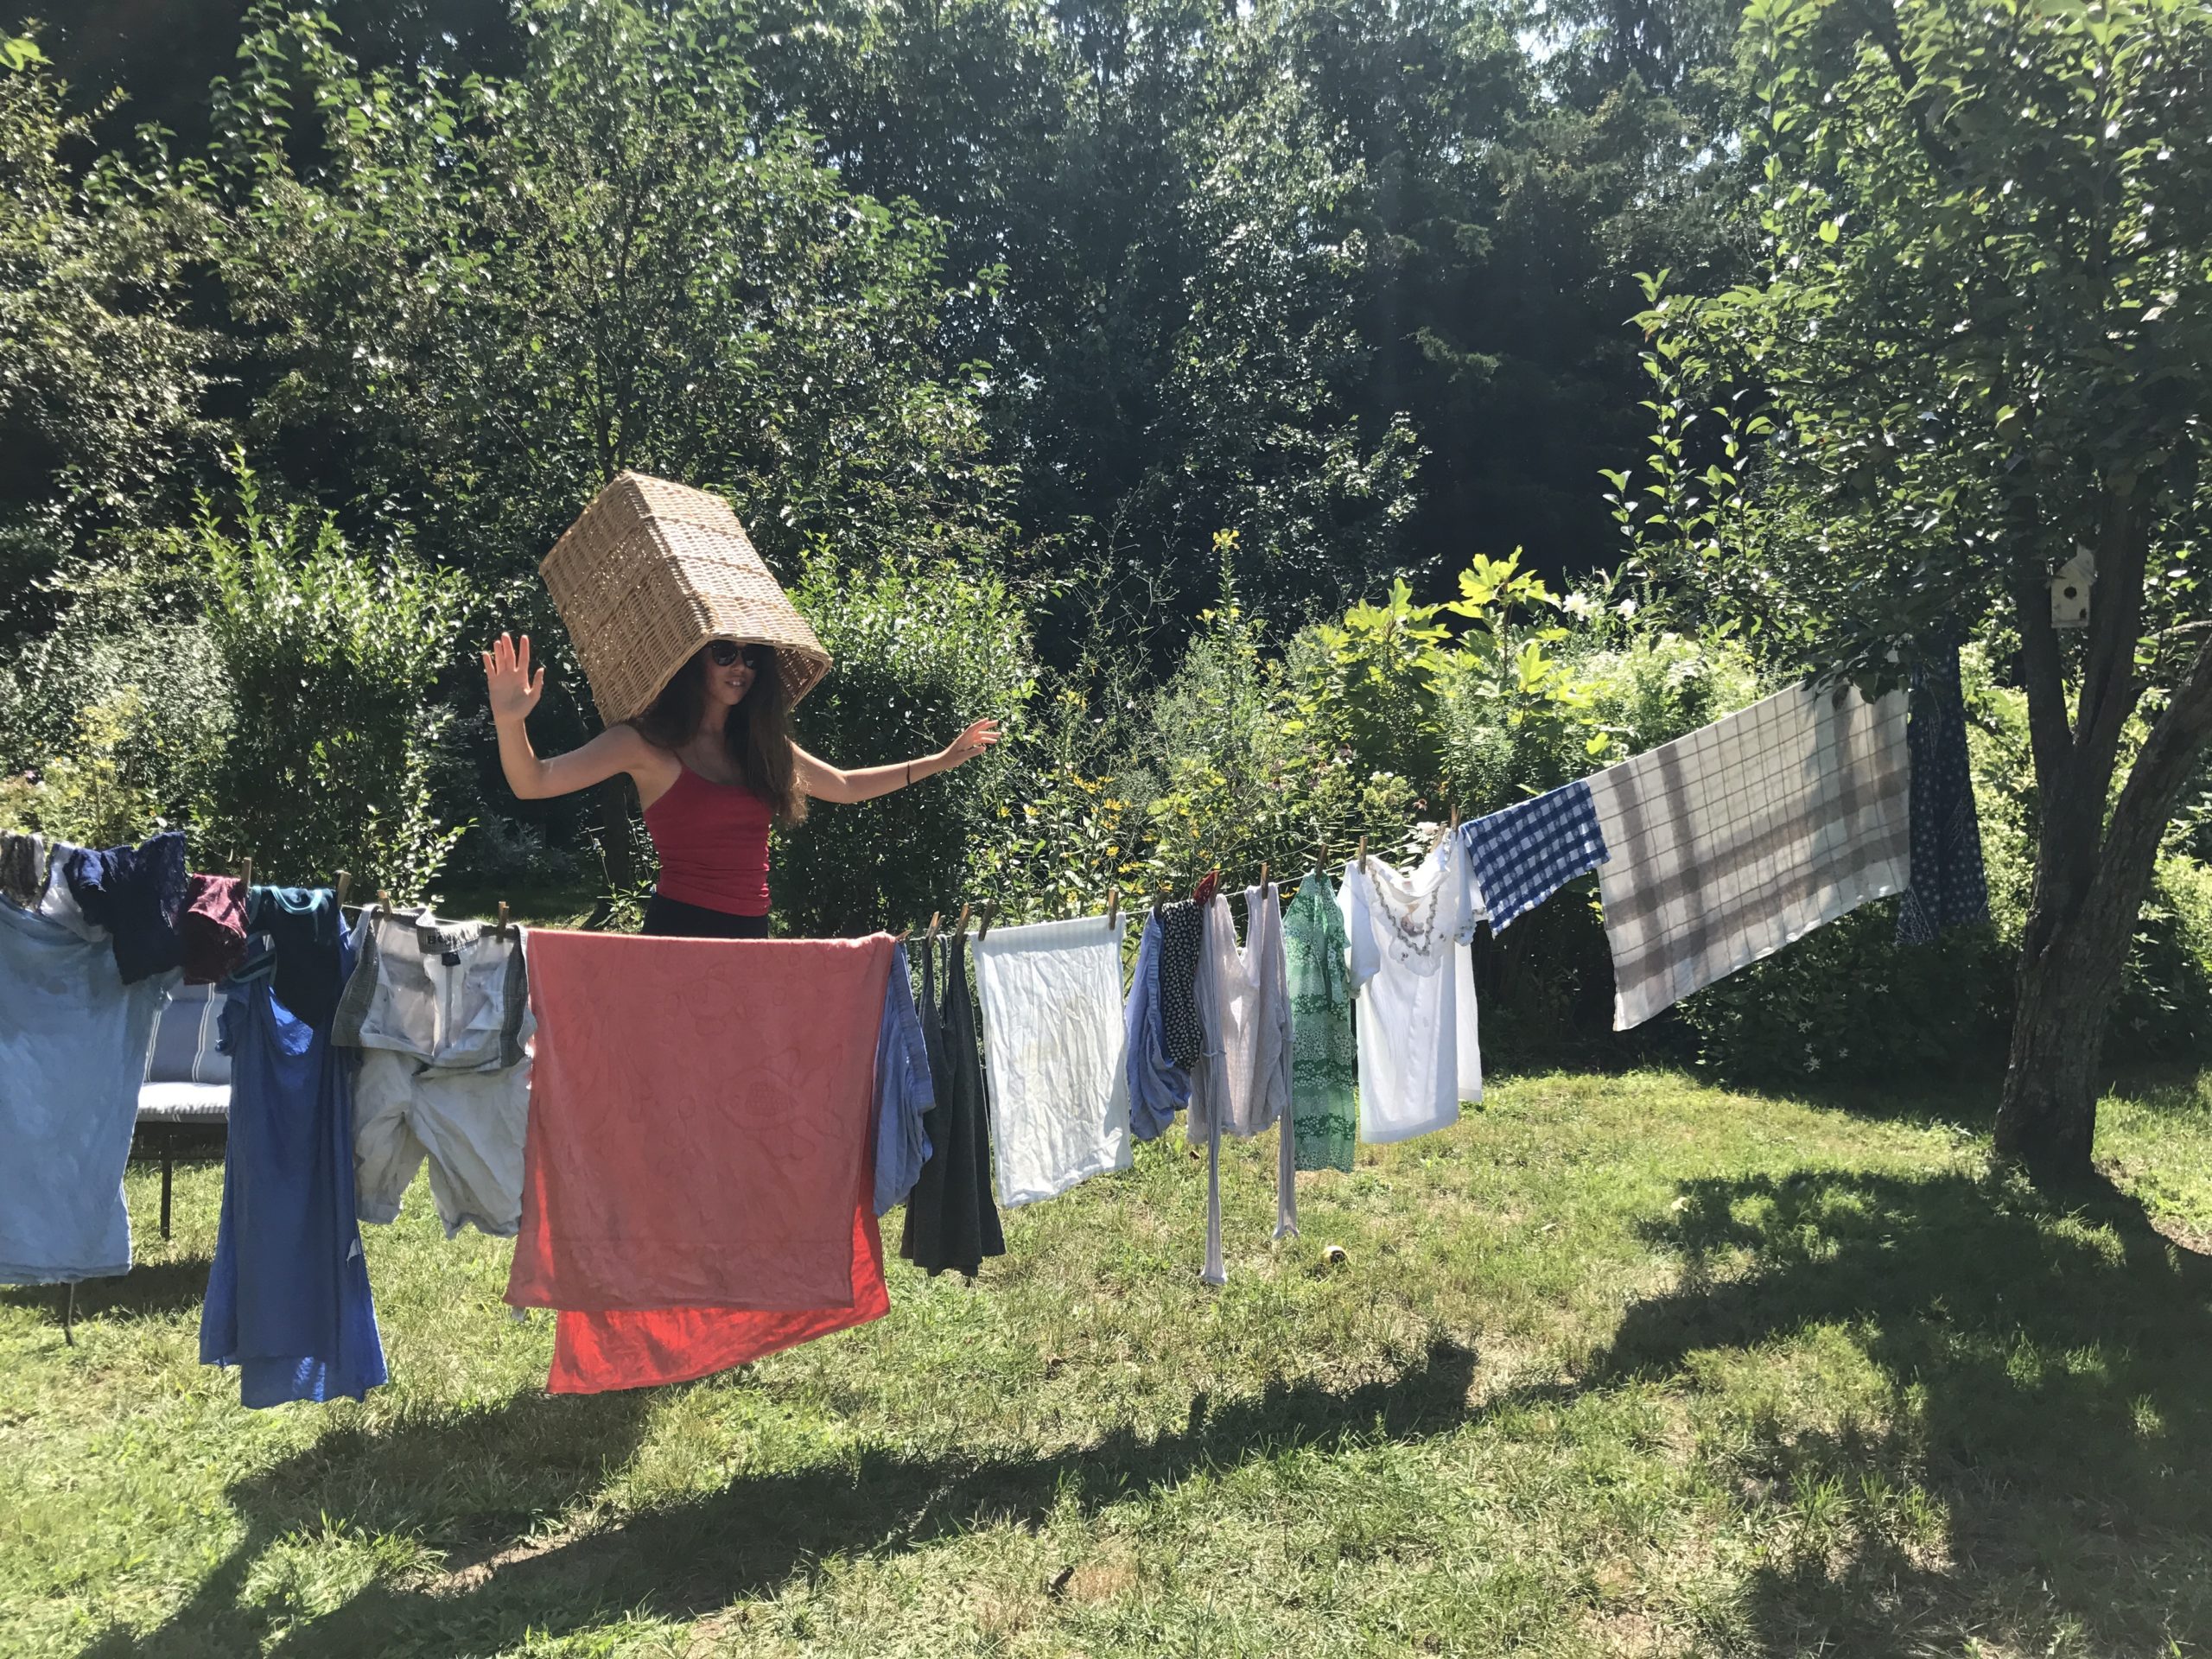 Teenager Carley Wootton demonstrates that air drying laundry tree-to-tree isn’t always done efficiently.